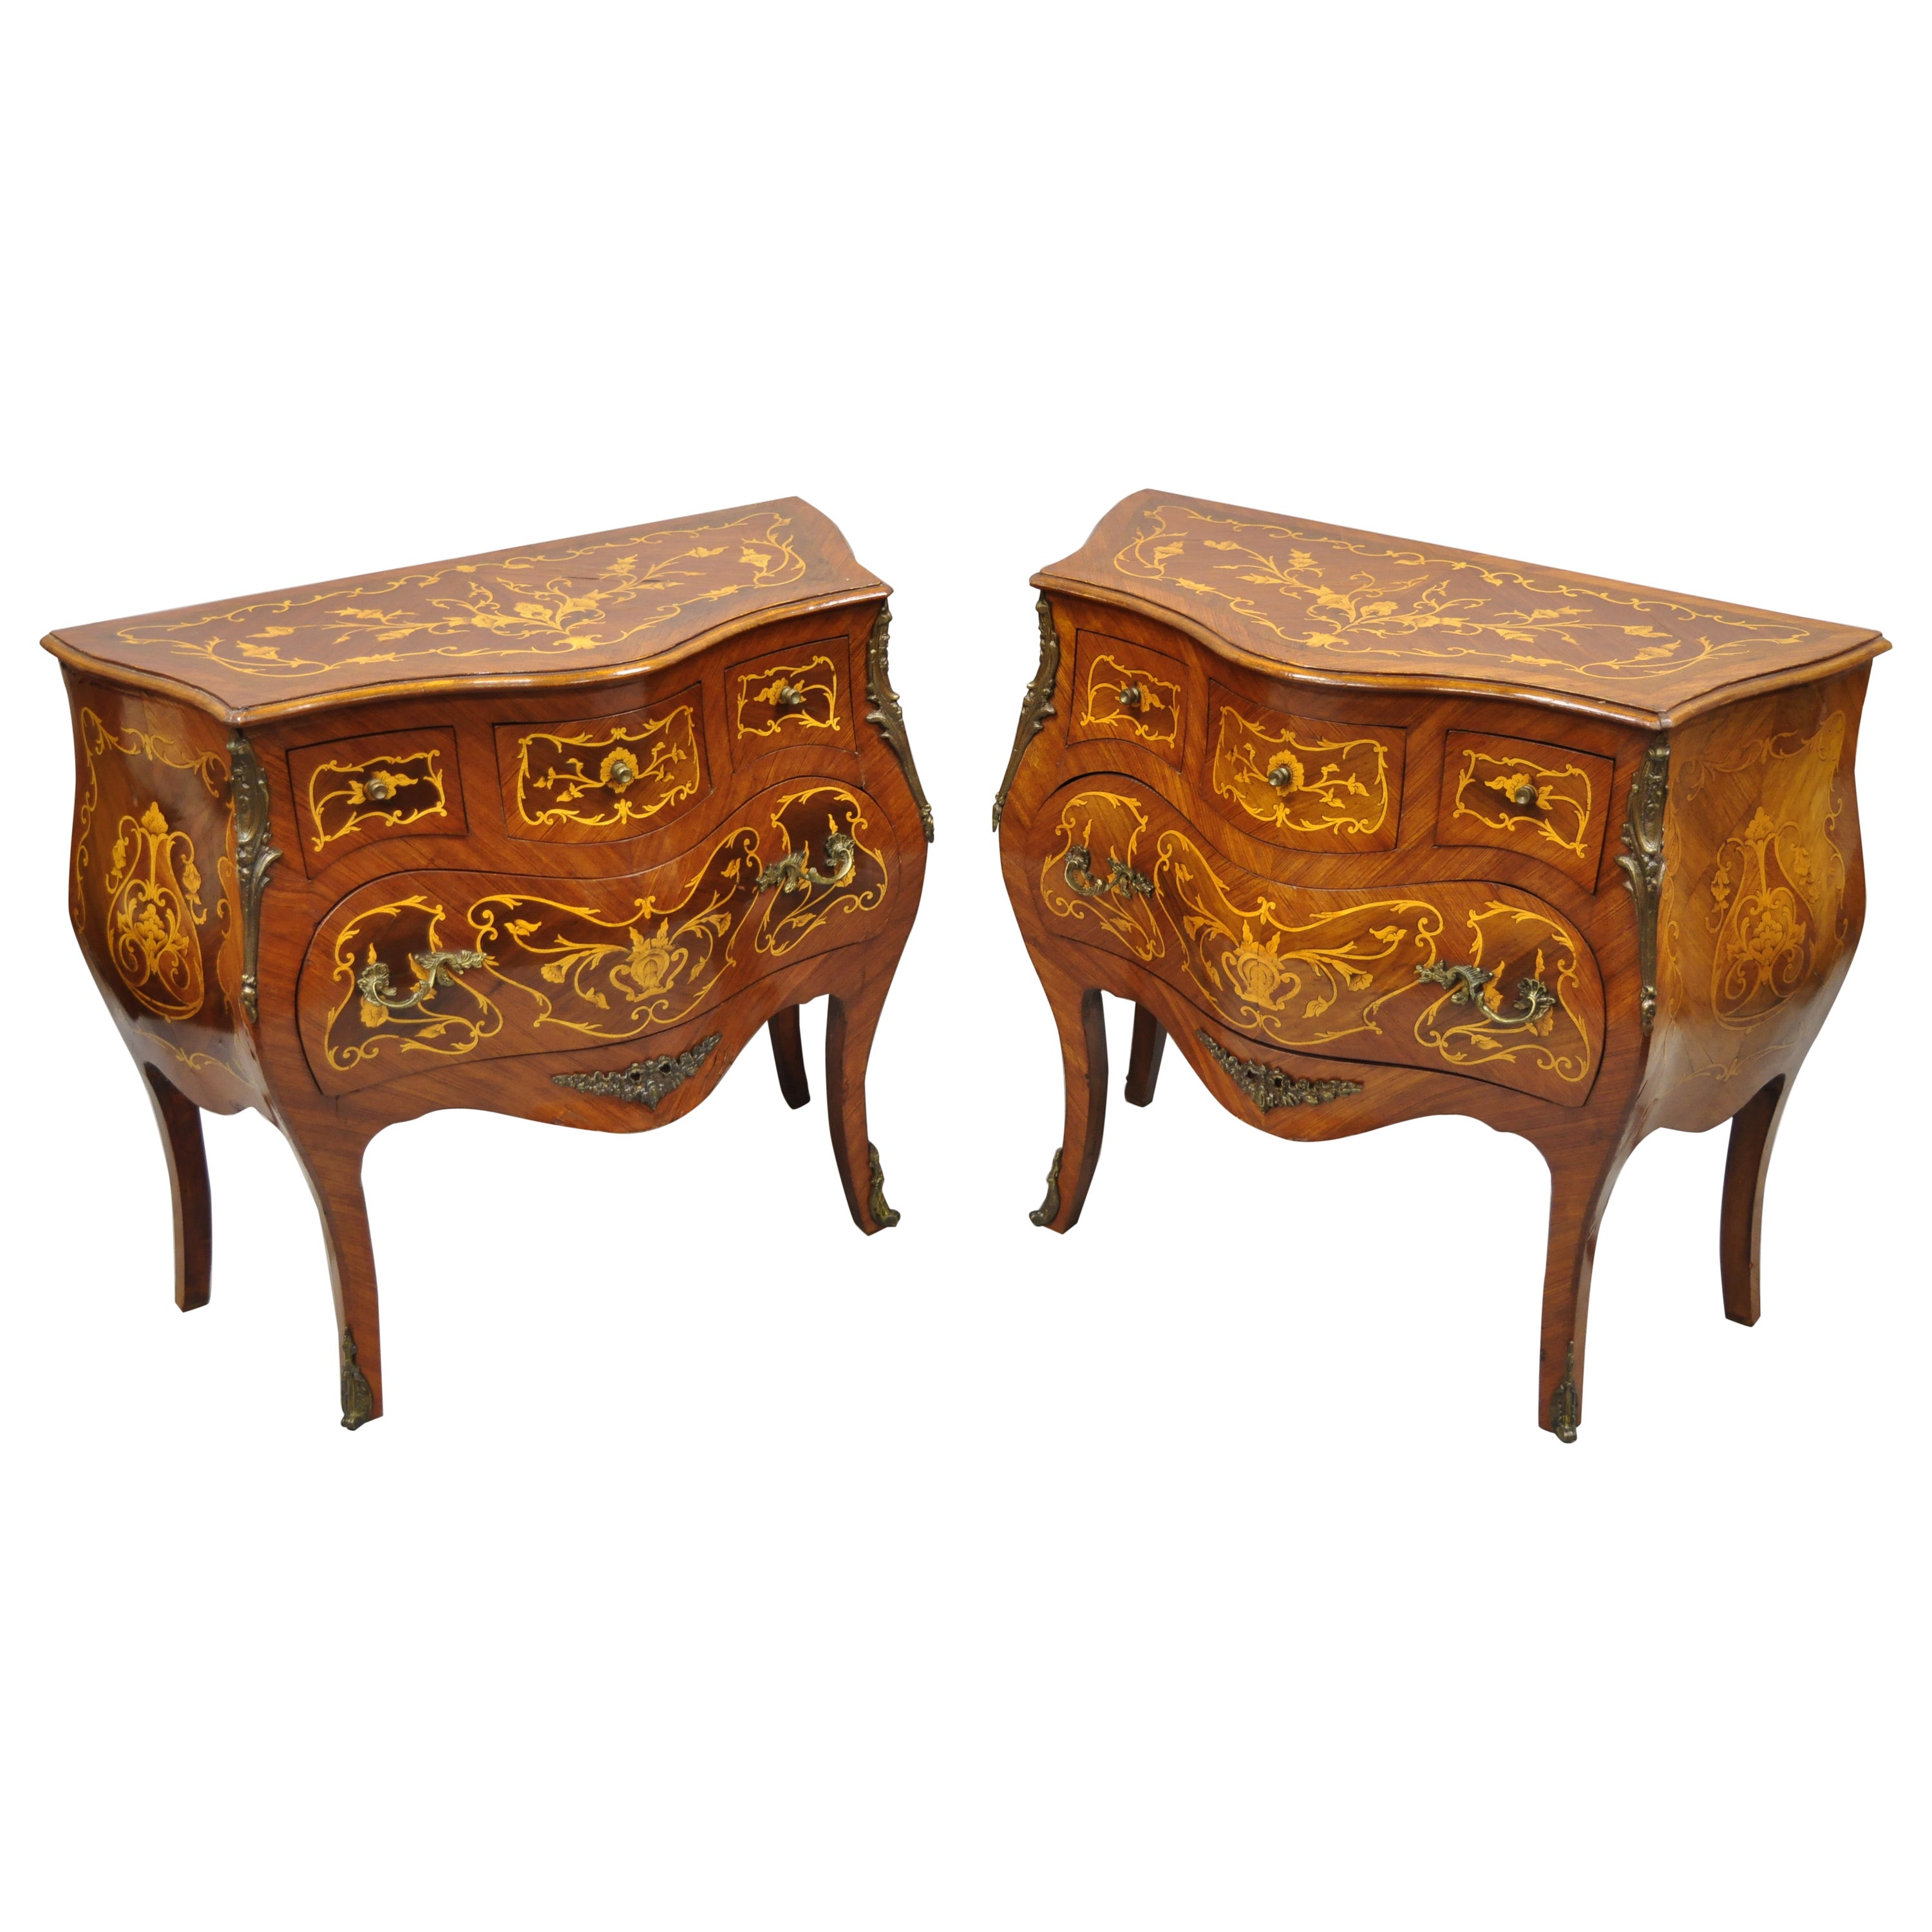 French Louis XV Styl Marquetry Inlay Bombe Commode Chest Bedside Table, a Pair